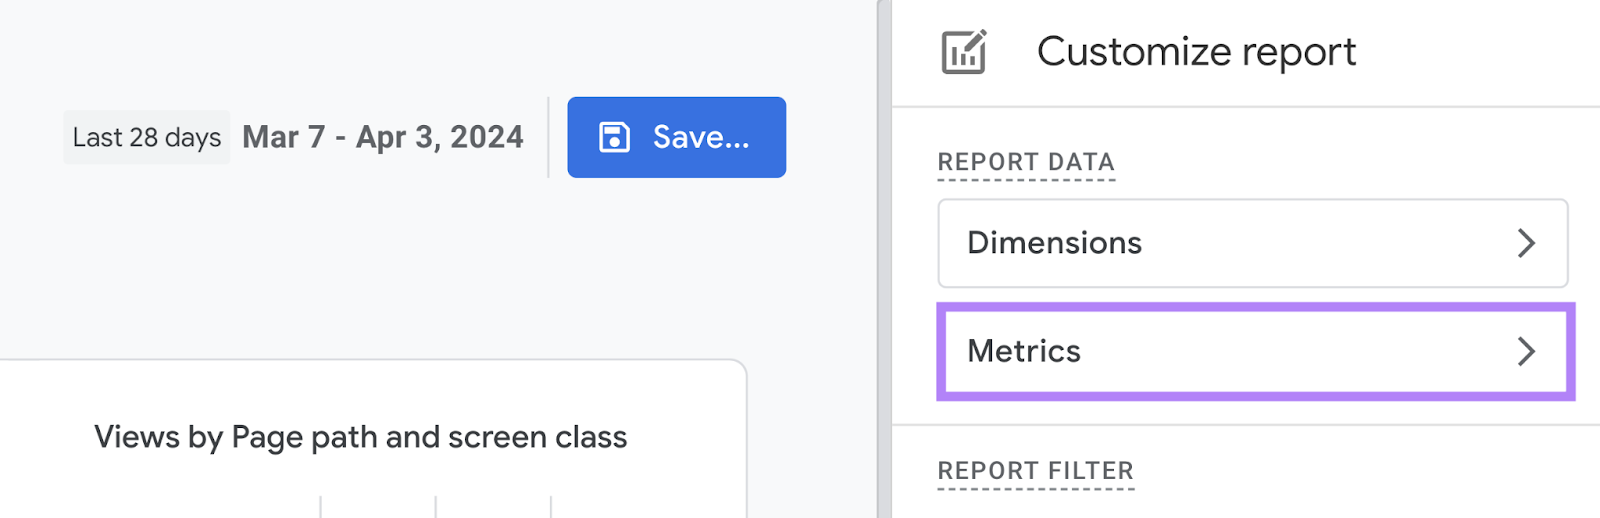 “Metrics” highlighted under the “Report Data” section